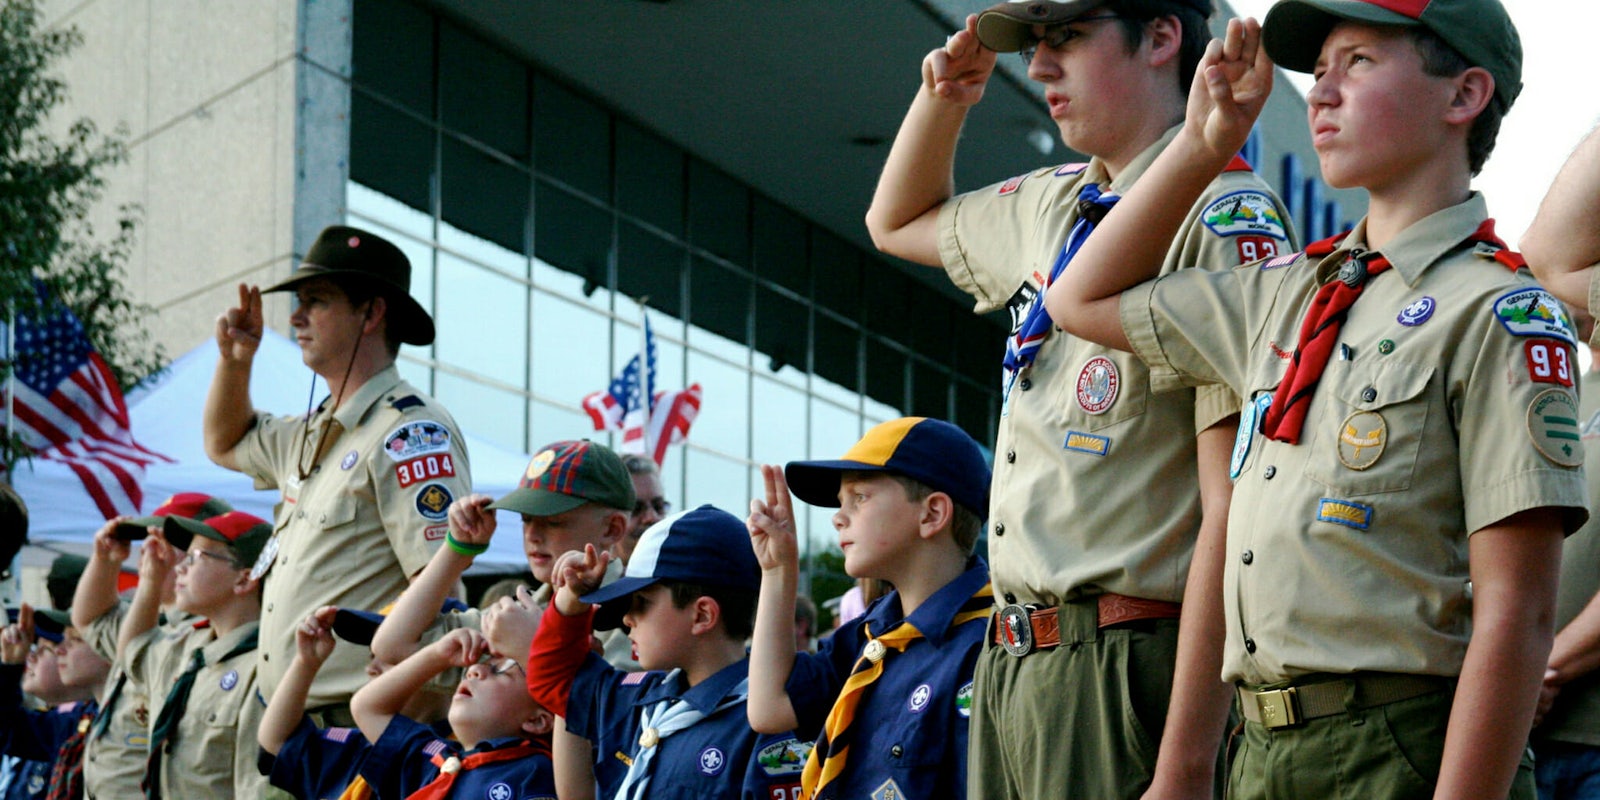 Boy Scout saluting a flag at the Gerald R. Ford Museum.